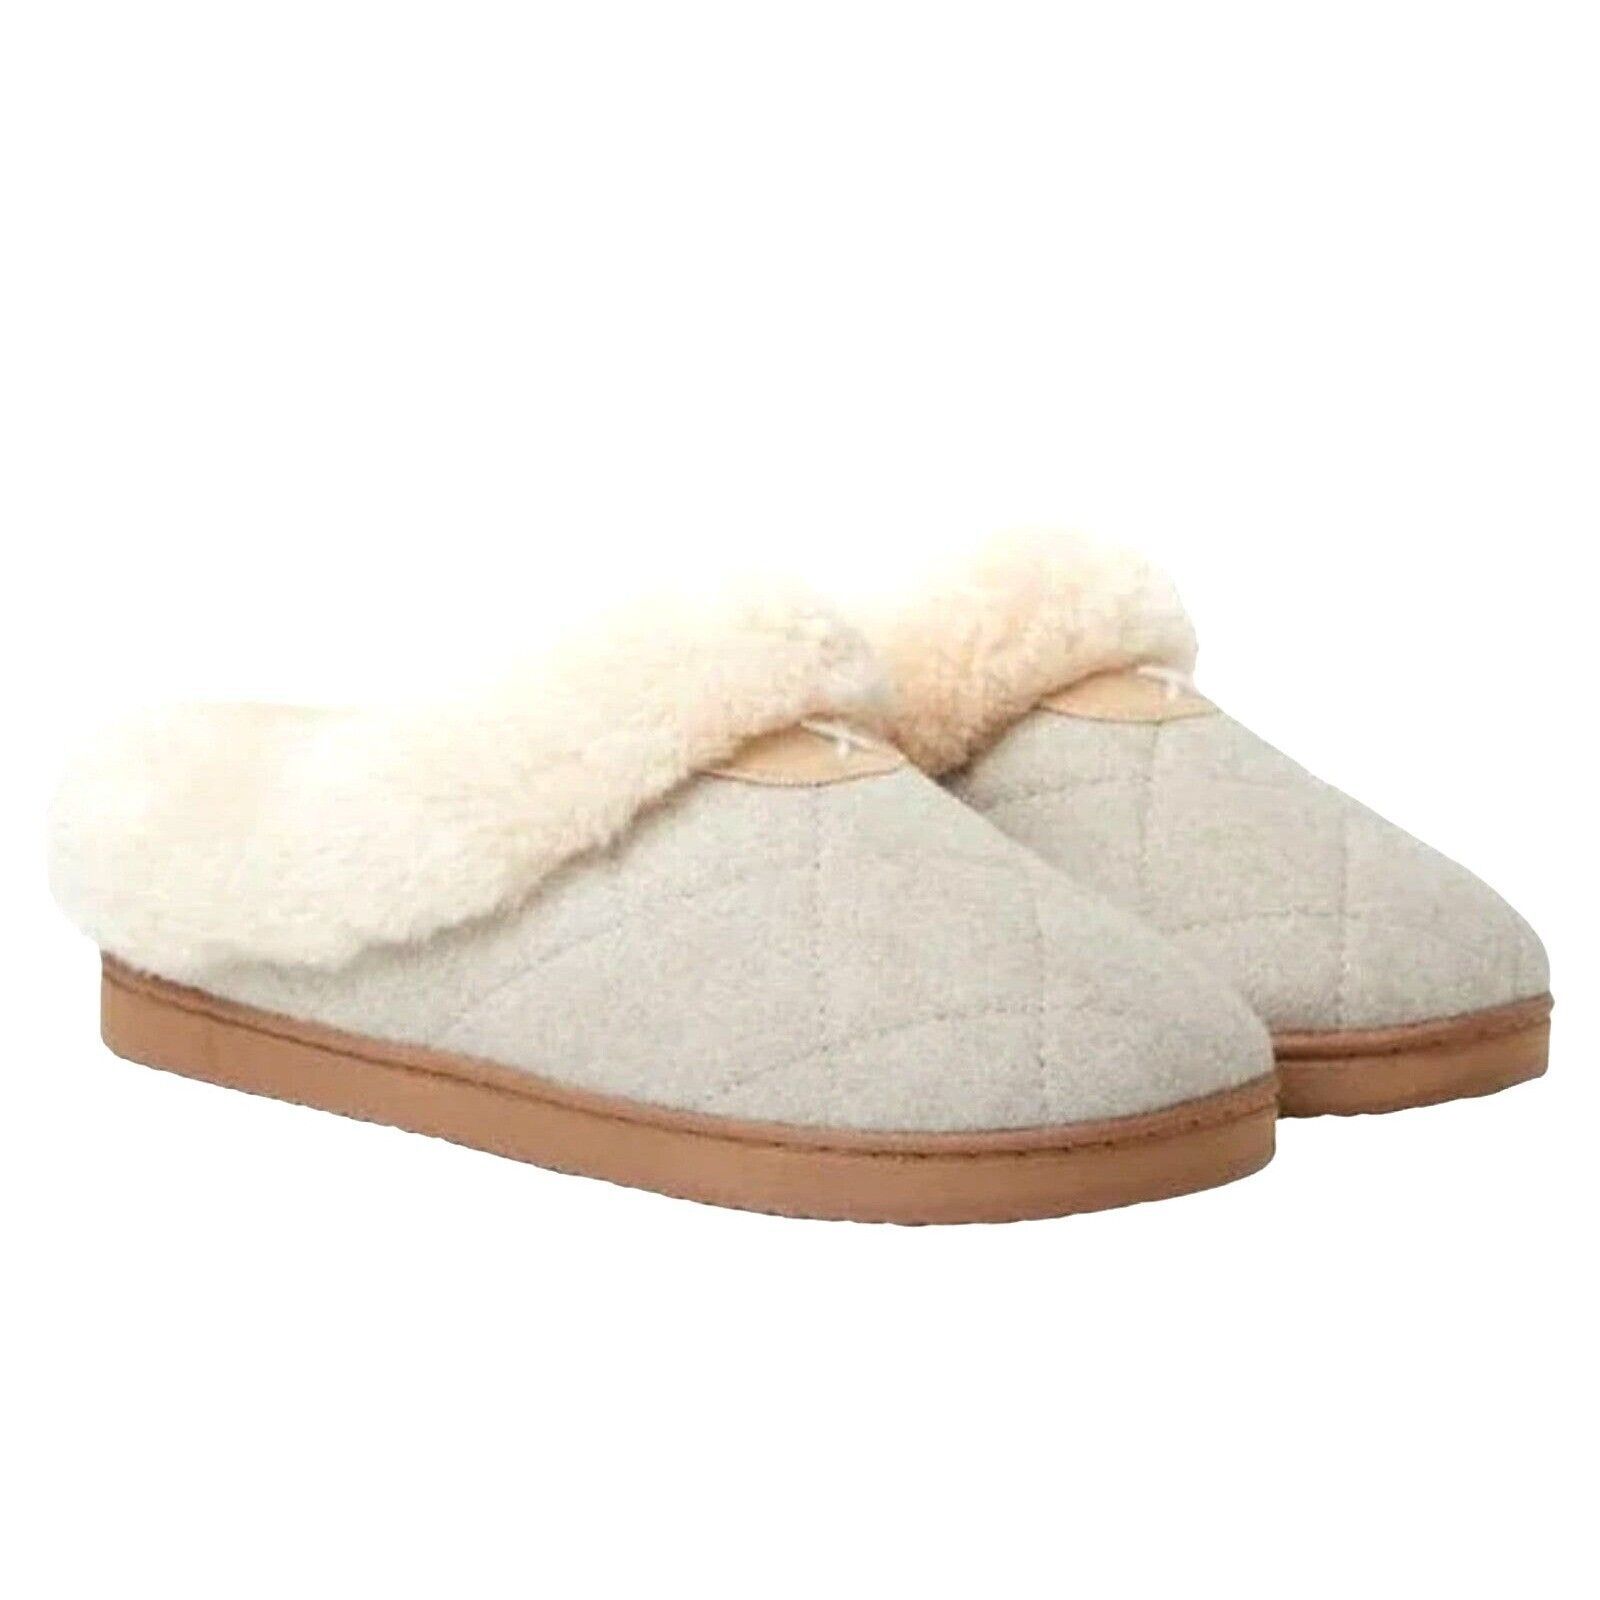 Primary image for New DEARFOAMS Slippers Woman's 5/6 House Shoes Clogs Loungewear Wool Casual